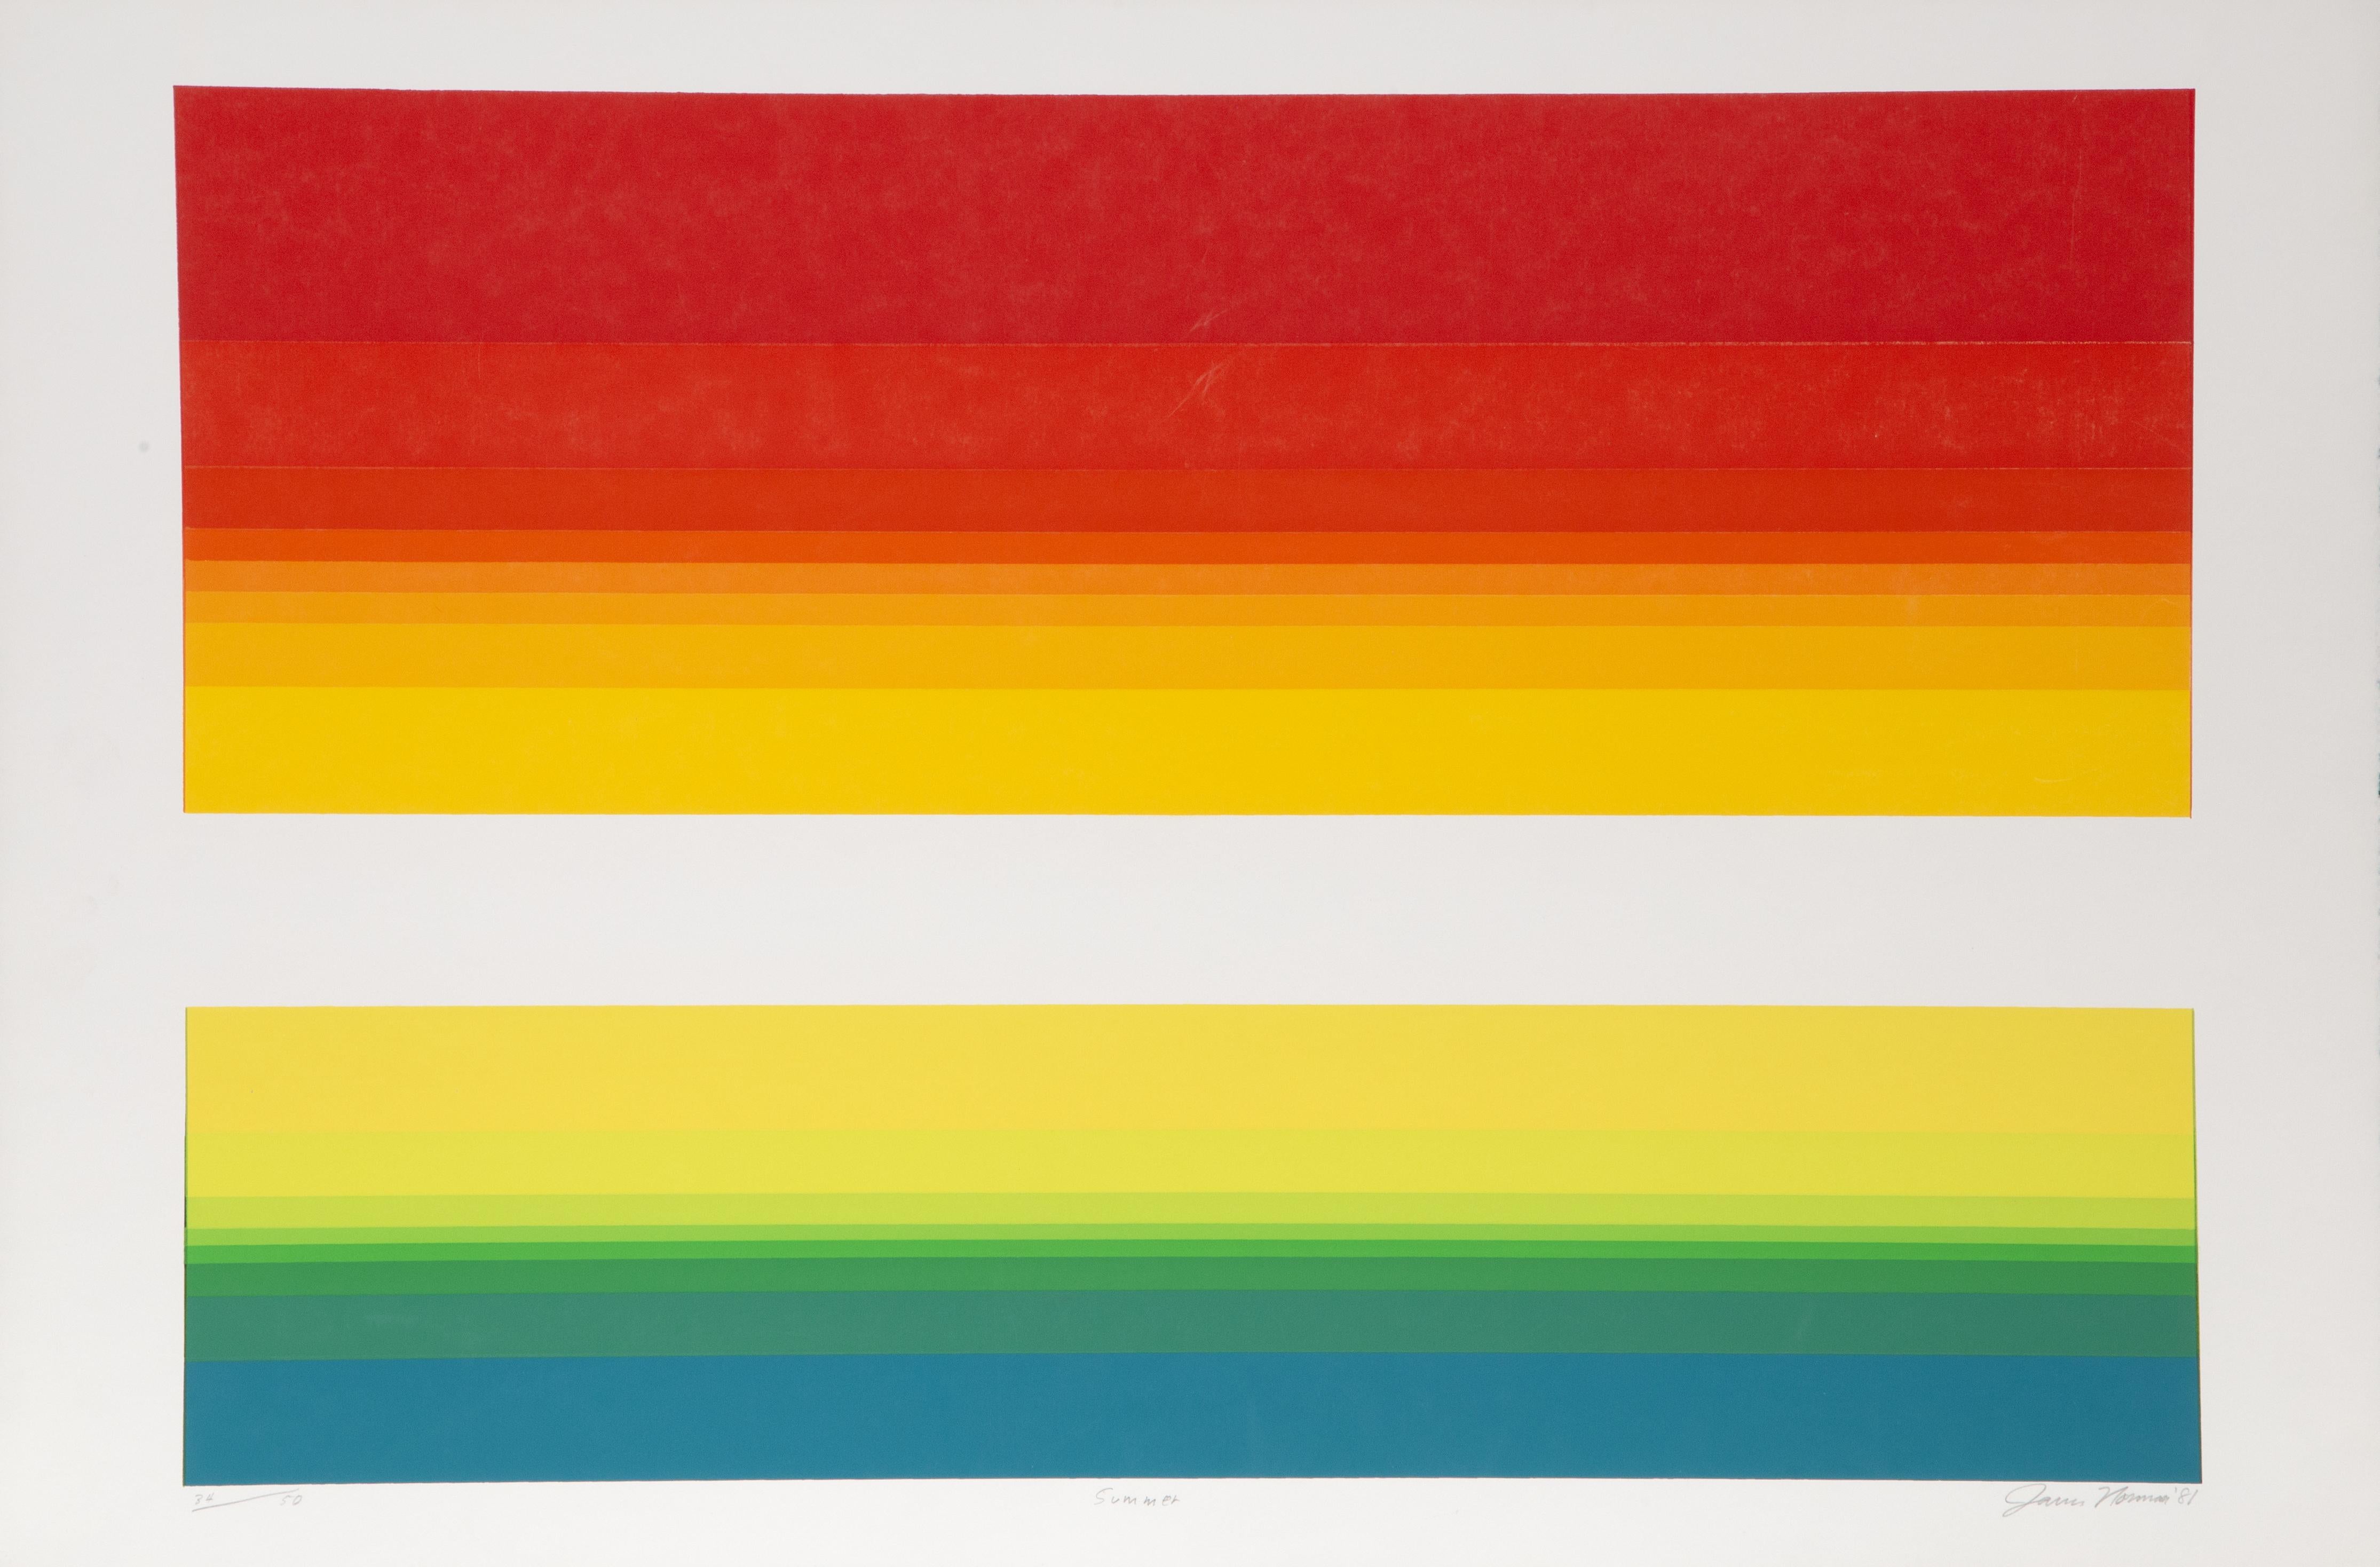 Artist: James Norman, American (1927 - 2011)
Title: Summer
Year: 1981
Medium: Screenprint, signed and numbered in pencil
Edition: 39/50
Image Size: 22 x 32 inches
Size: 25 x 38 in. (63.5 x 96.52 cm)